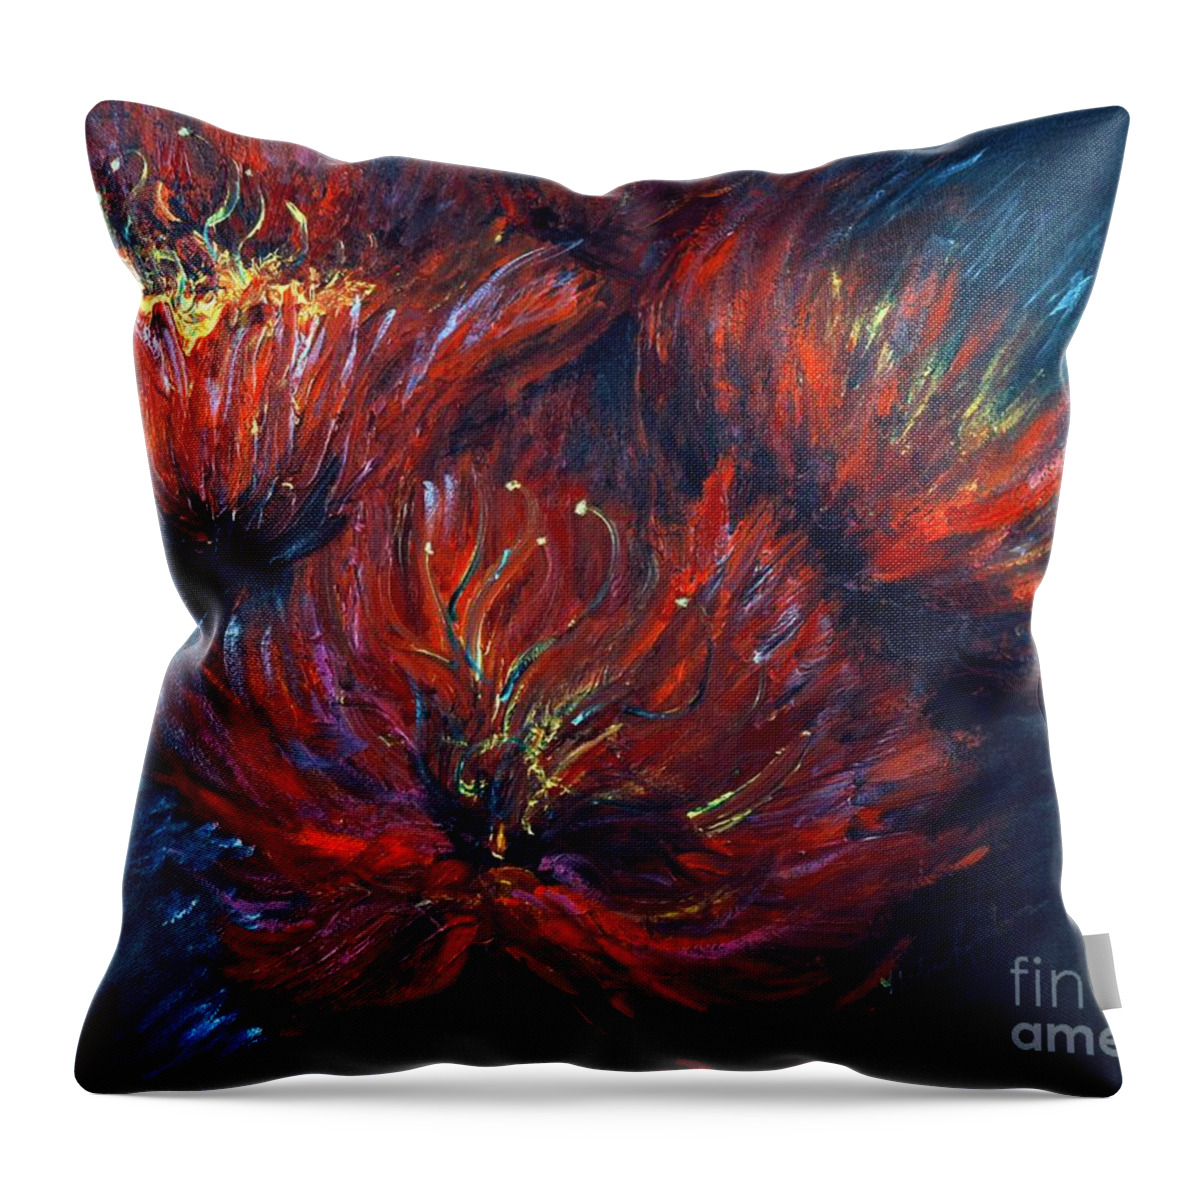 Abstract Throw Pillow featuring the painting Fellowship by Nadine Rippelmeyer